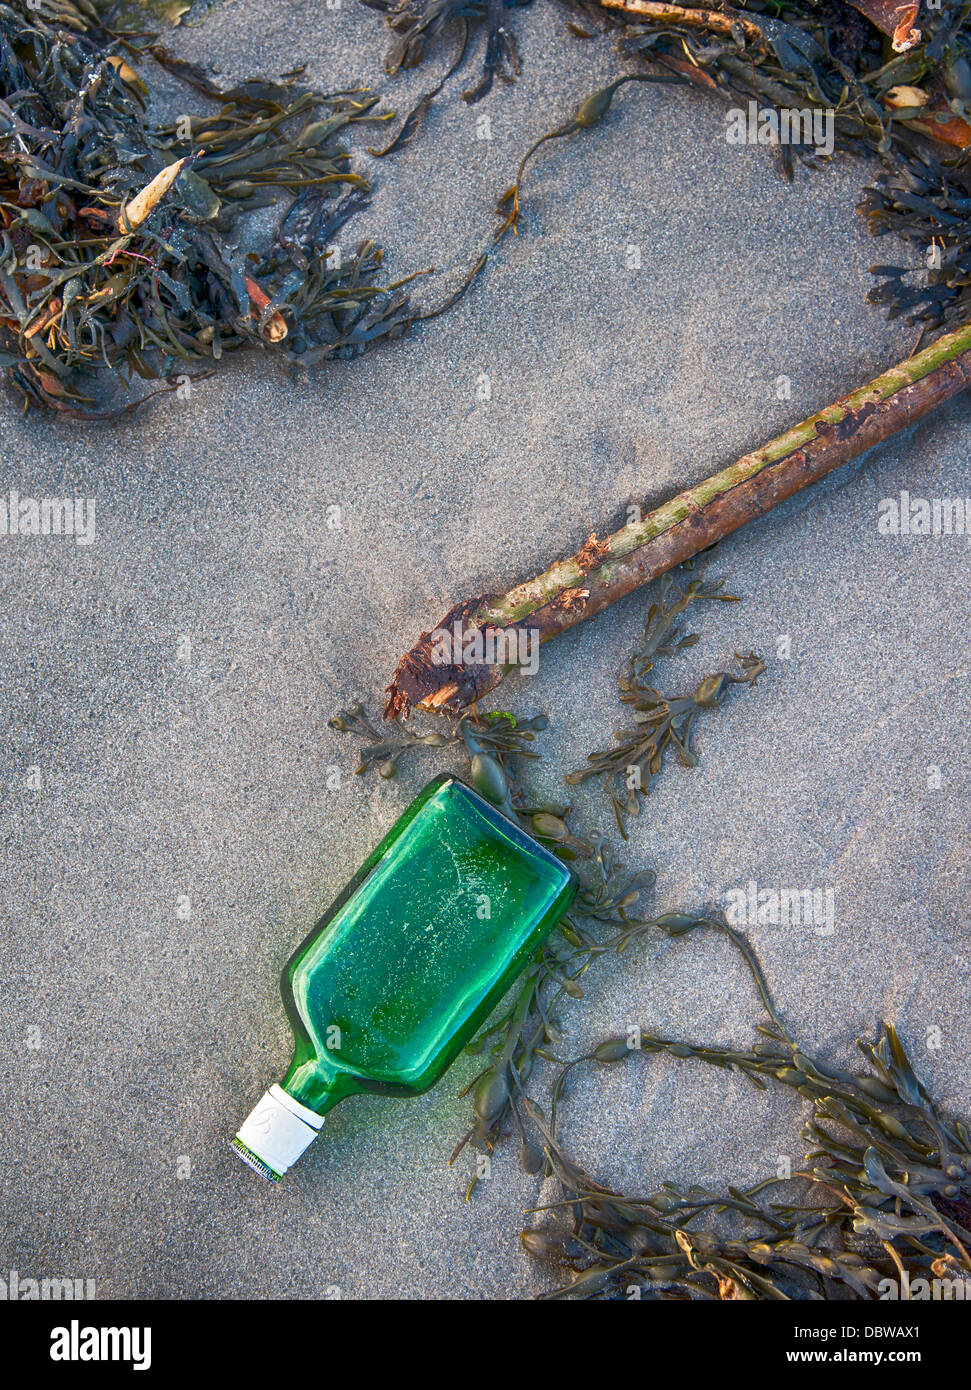 Green Bottle Washed Up A Beach Stock Photo